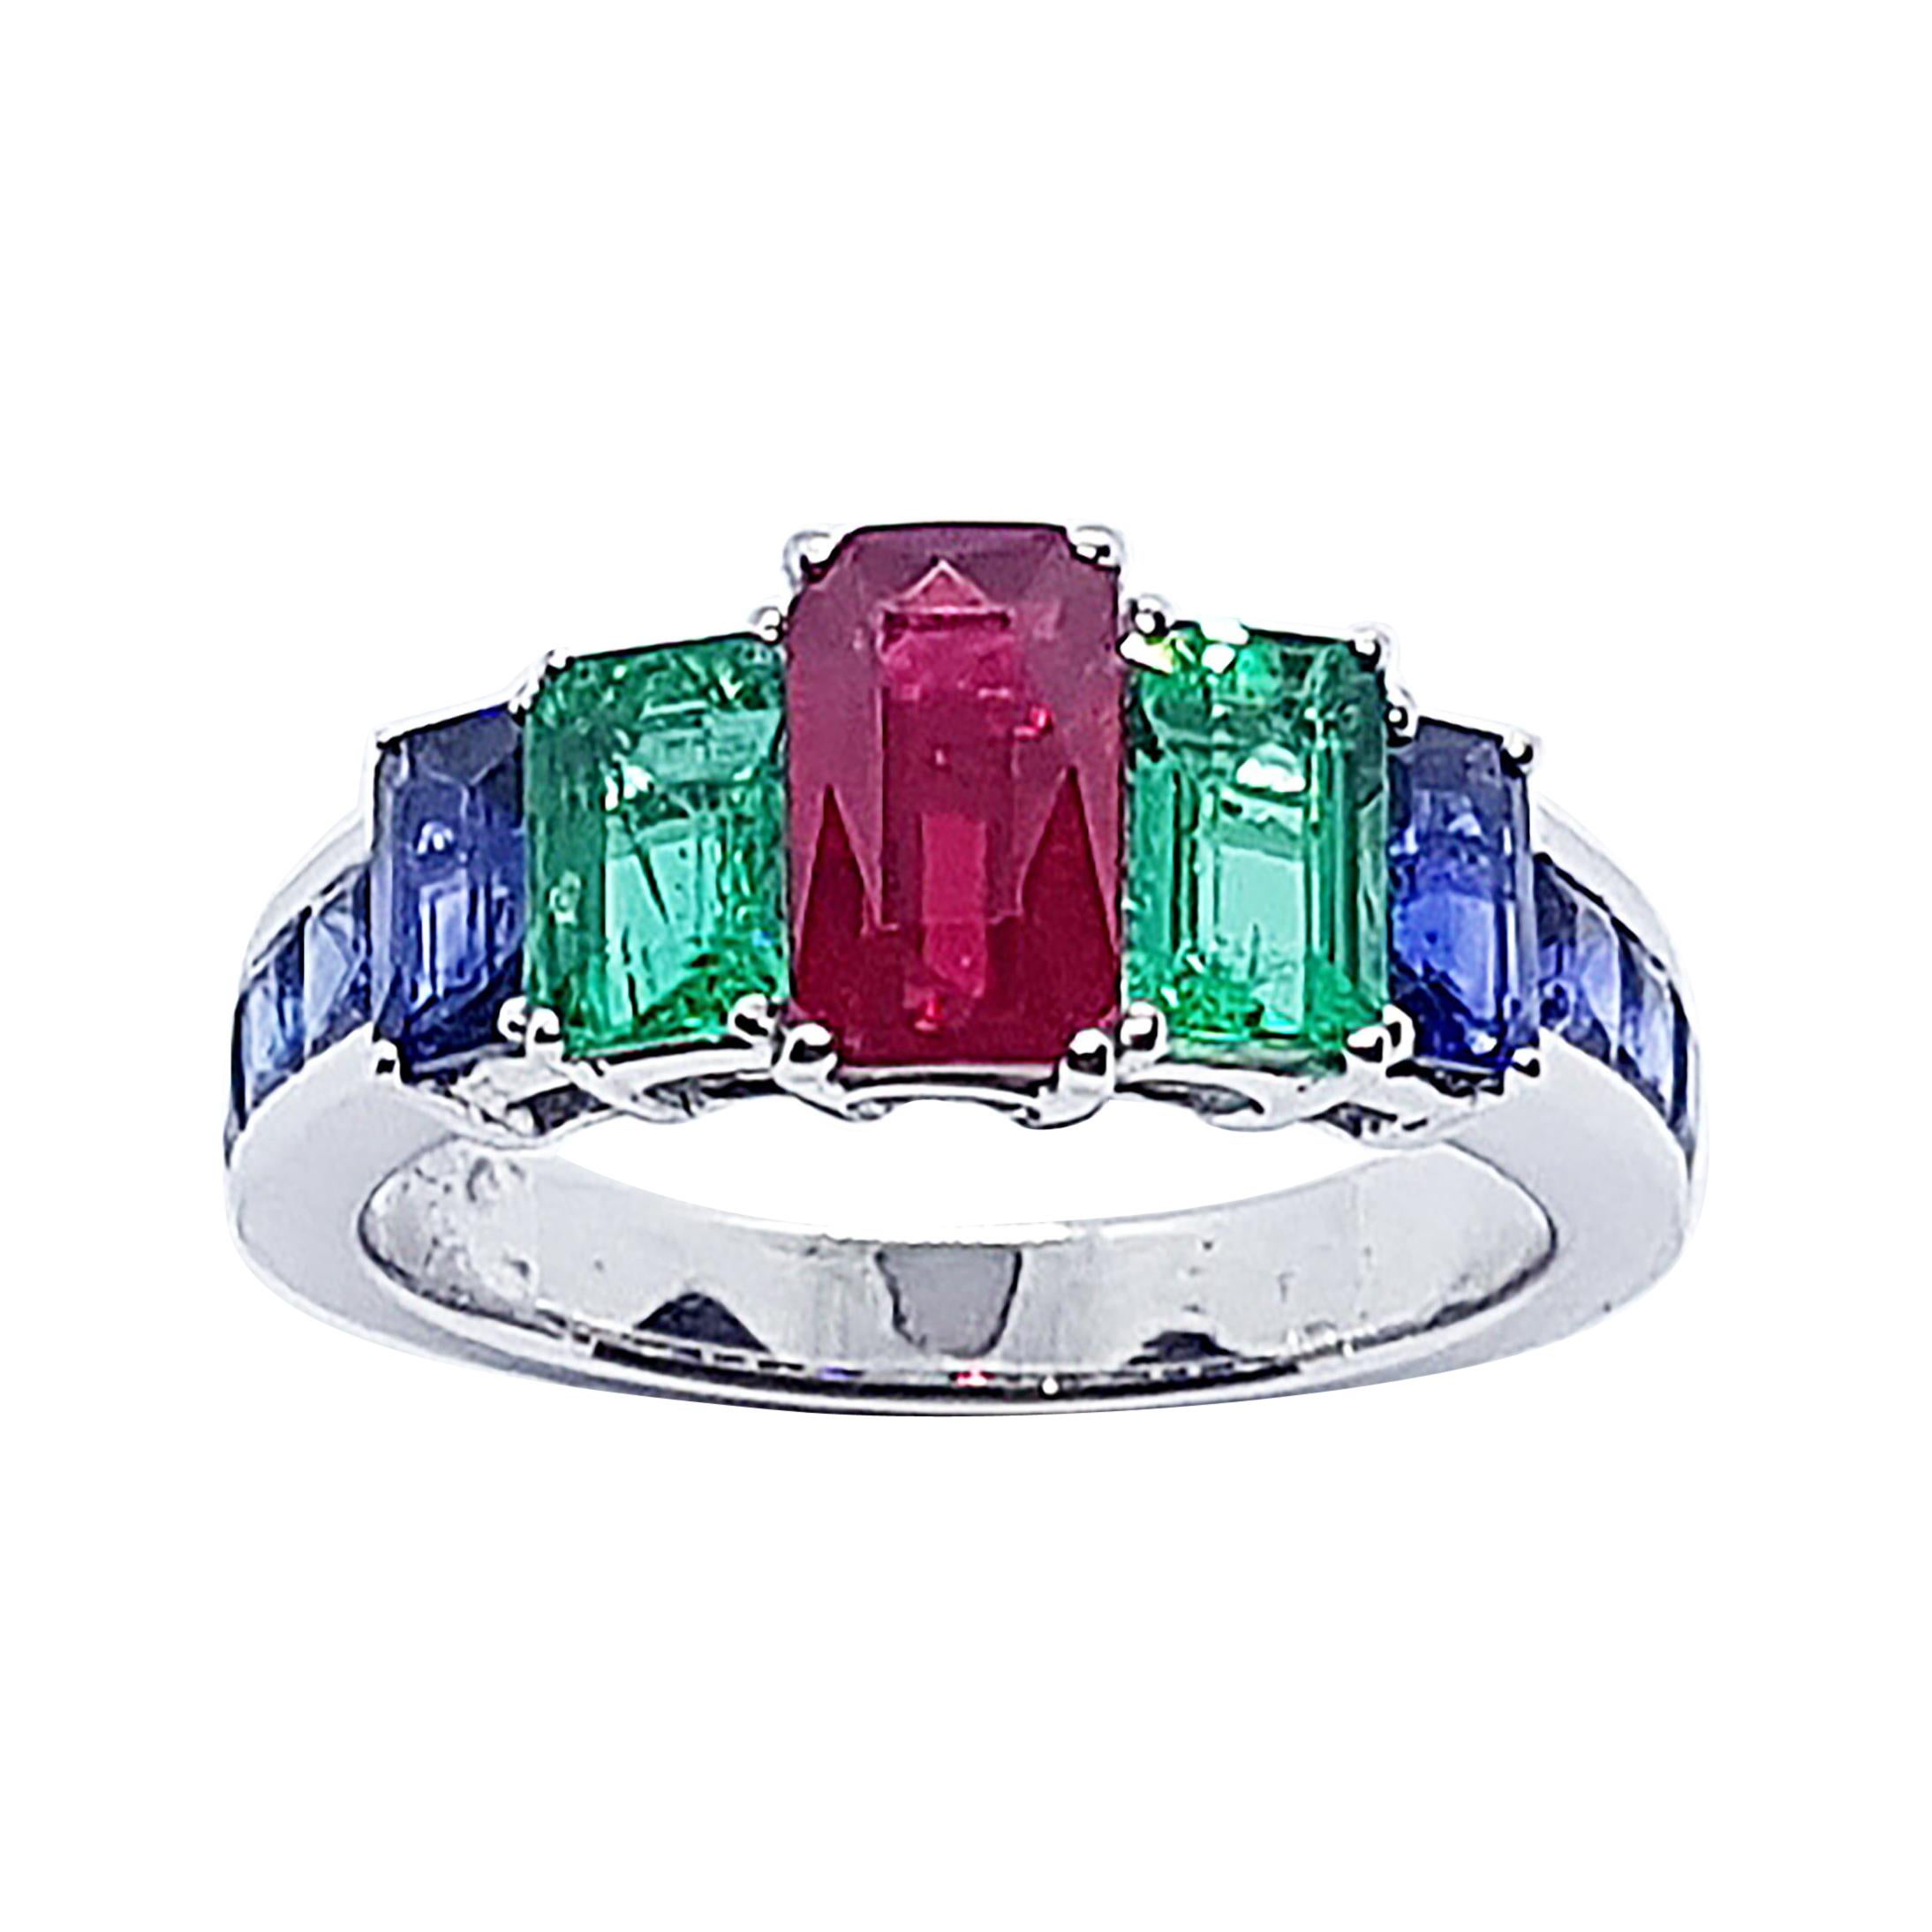 Ruby, Emerald and Blue Sapphire Ring Set in 18 Karat White Gold Settings For Sale